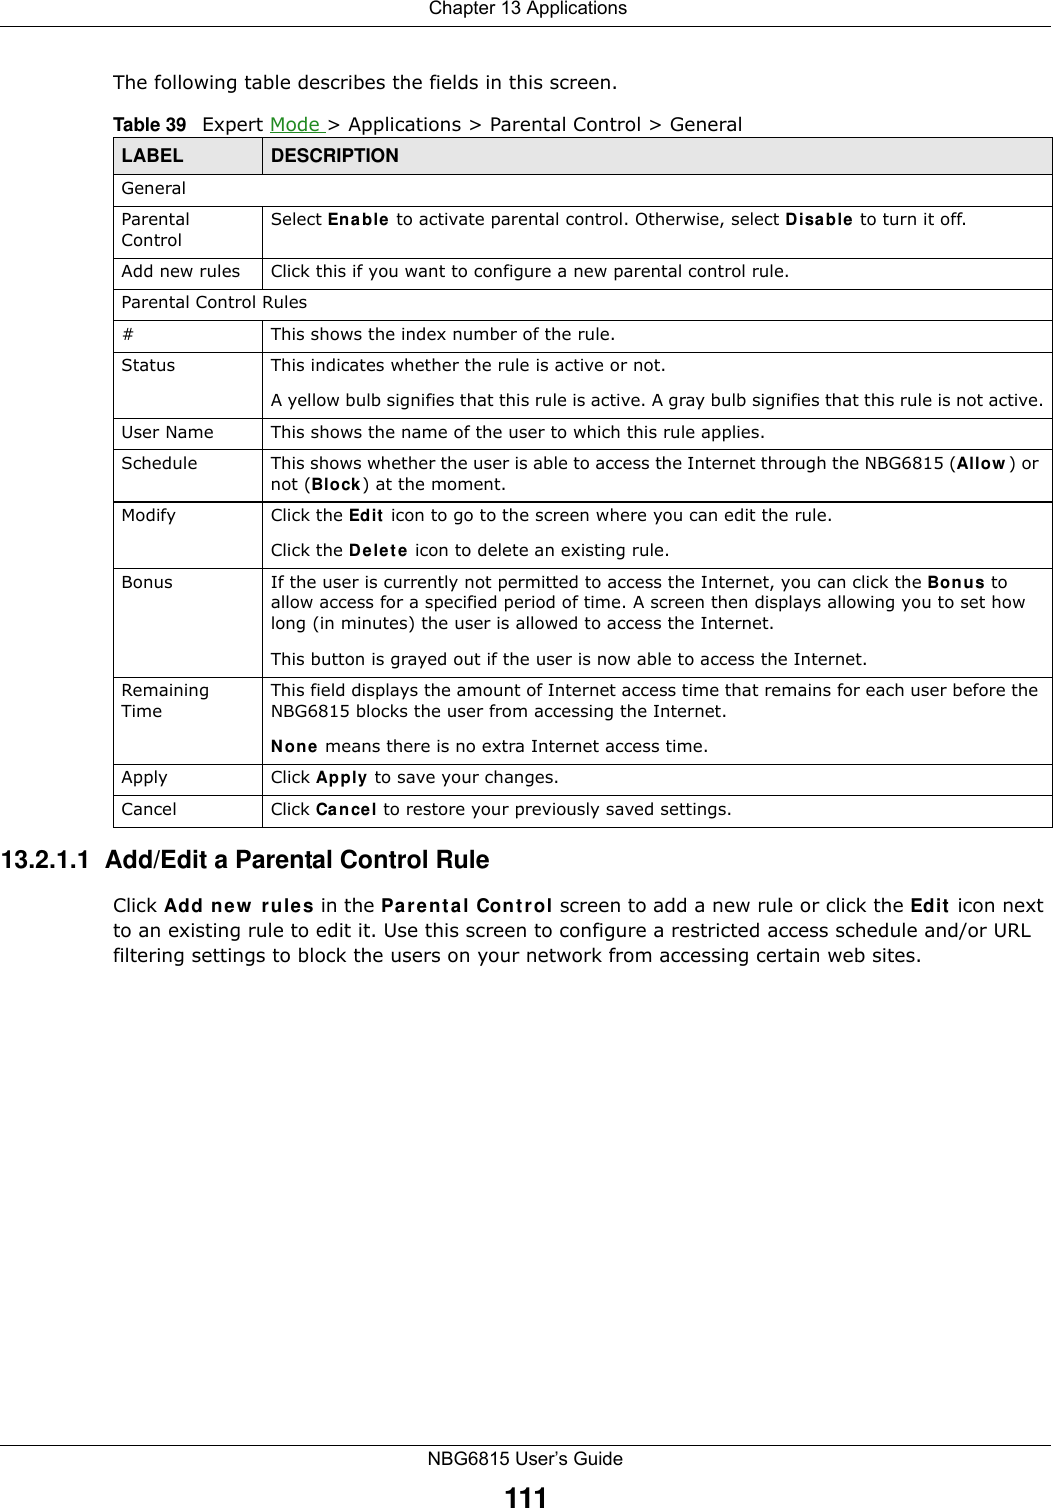  Chapter 13 ApplicationsNBG6815 User’s Guide111The following table describes the fields in this screen. 13.2.1.1  Add/Edit a Parental Control RuleClick Add new rules in the Parental Control screen to add a new rule or click the Edit icon next to an existing rule to edit it. Use this screen to configure a restricted access schedule and/or URL filtering settings to block the users on your network from accessing certain web sites.Table 39   Expert Mode &gt; Applications &gt; Parental Control &gt; GeneralLABEL DESCRIPTIONGeneralParental ControlSelect Enable to activate parental control. Otherwise, select Disable to turn it off.Add new rules Click this if you want to configure a new parental control rule.Parental Control Rules#This shows the index number of the rule.Status This indicates whether the rule is active or not.A yellow bulb signifies that this rule is active. A gray bulb signifies that this rule is not active.User Name This shows the name of the user to which this rule applies.Schedule This shows whether the user is able to access the Internet through the NBG6815 (Allow) or not (Block) at the moment.Modify Click the Edit icon to go to the screen where you can edit the rule.Click the Delete icon to delete an existing rule.Bonus If the user is currently not permitted to access the Internet, you can click the Bonus to allow access for a specified period of time. A screen then displays allowing you to set how long (in minutes) the user is allowed to access the Internet.This button is grayed out if the user is now able to access the Internet.Remaining TimeThis field displays the amount of Internet access time that remains for each user before the NBG6815 blocks the user from accessing the Internet.None means there is no extra Internet access time. Apply Click Apply to save your changes.Cancel Click Cancel to restore your previously saved settings.